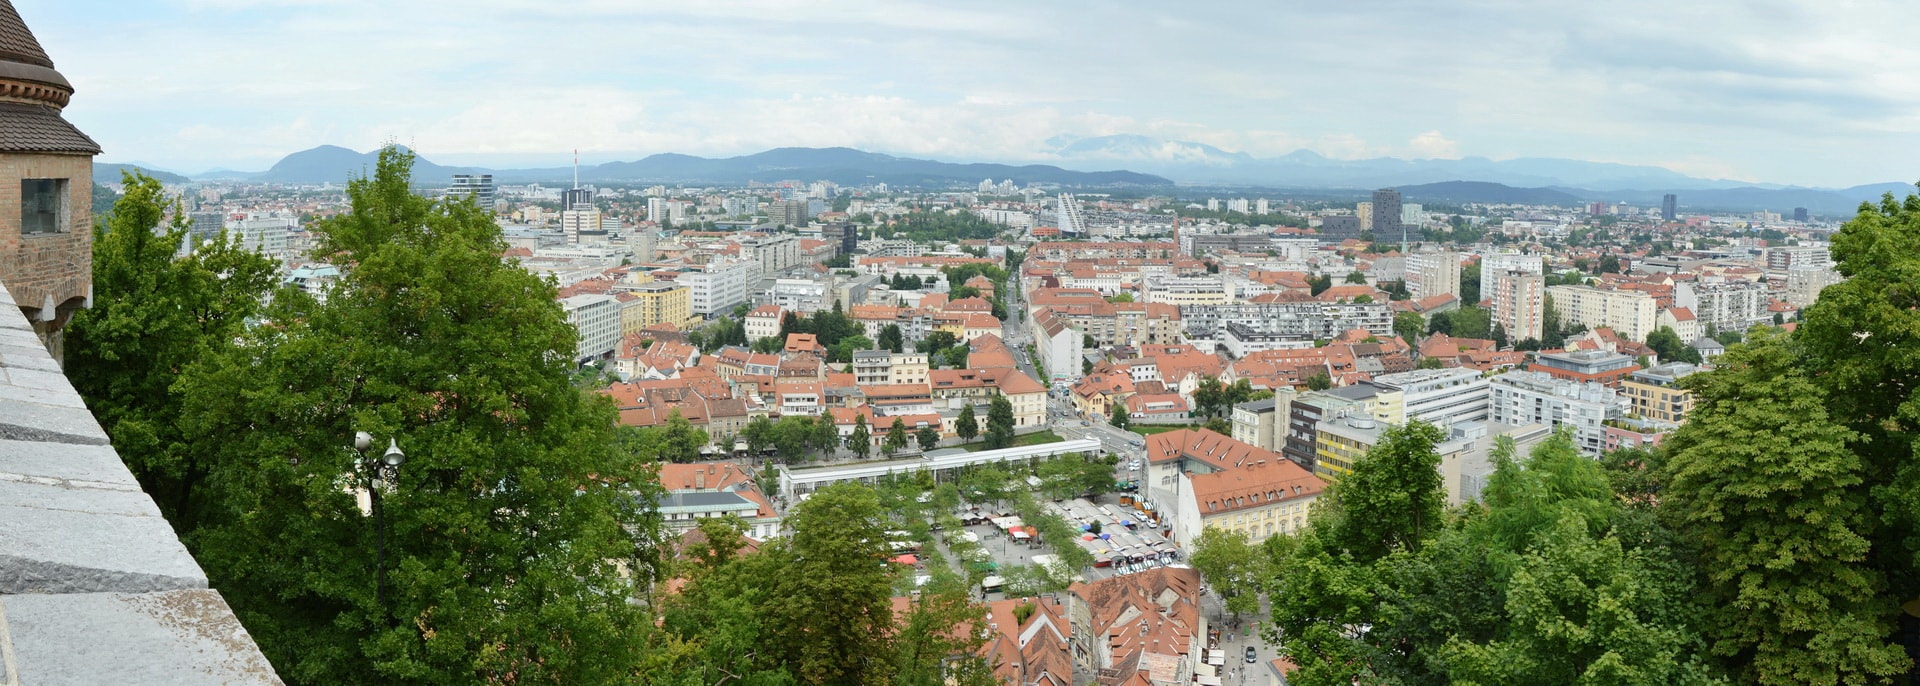 Looking to the north from Ljubljana Castle